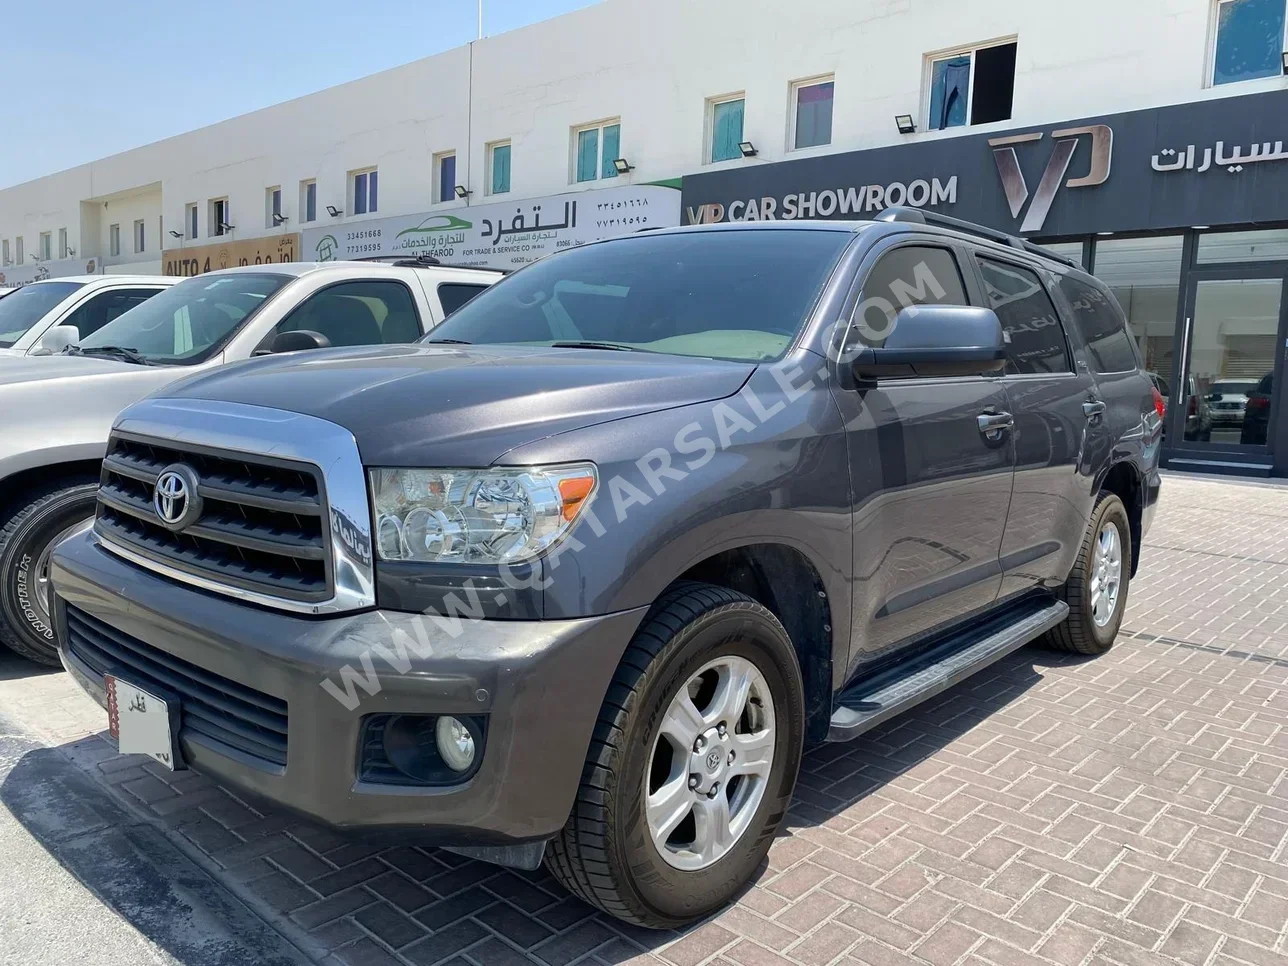 Toyota  Sequoia  SR5  2015  Automatic  320,000 Km  8 Cylinder  Four Wheel Drive (4WD)  SUV  Gray